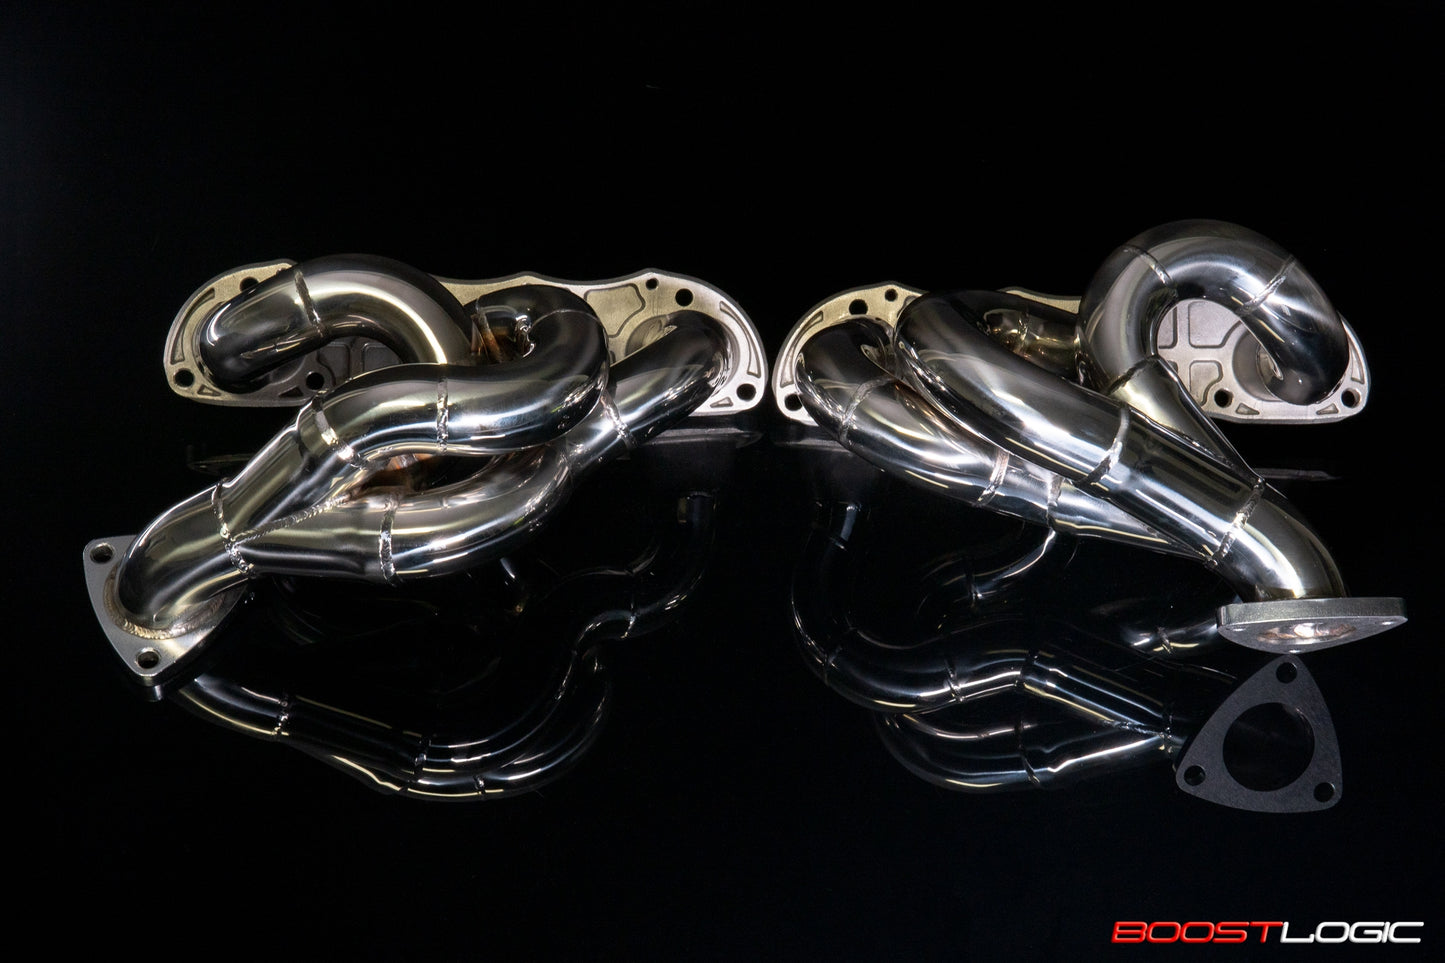 Boost Logic - OEM Replacement High Flow Headers for 991 Turbo